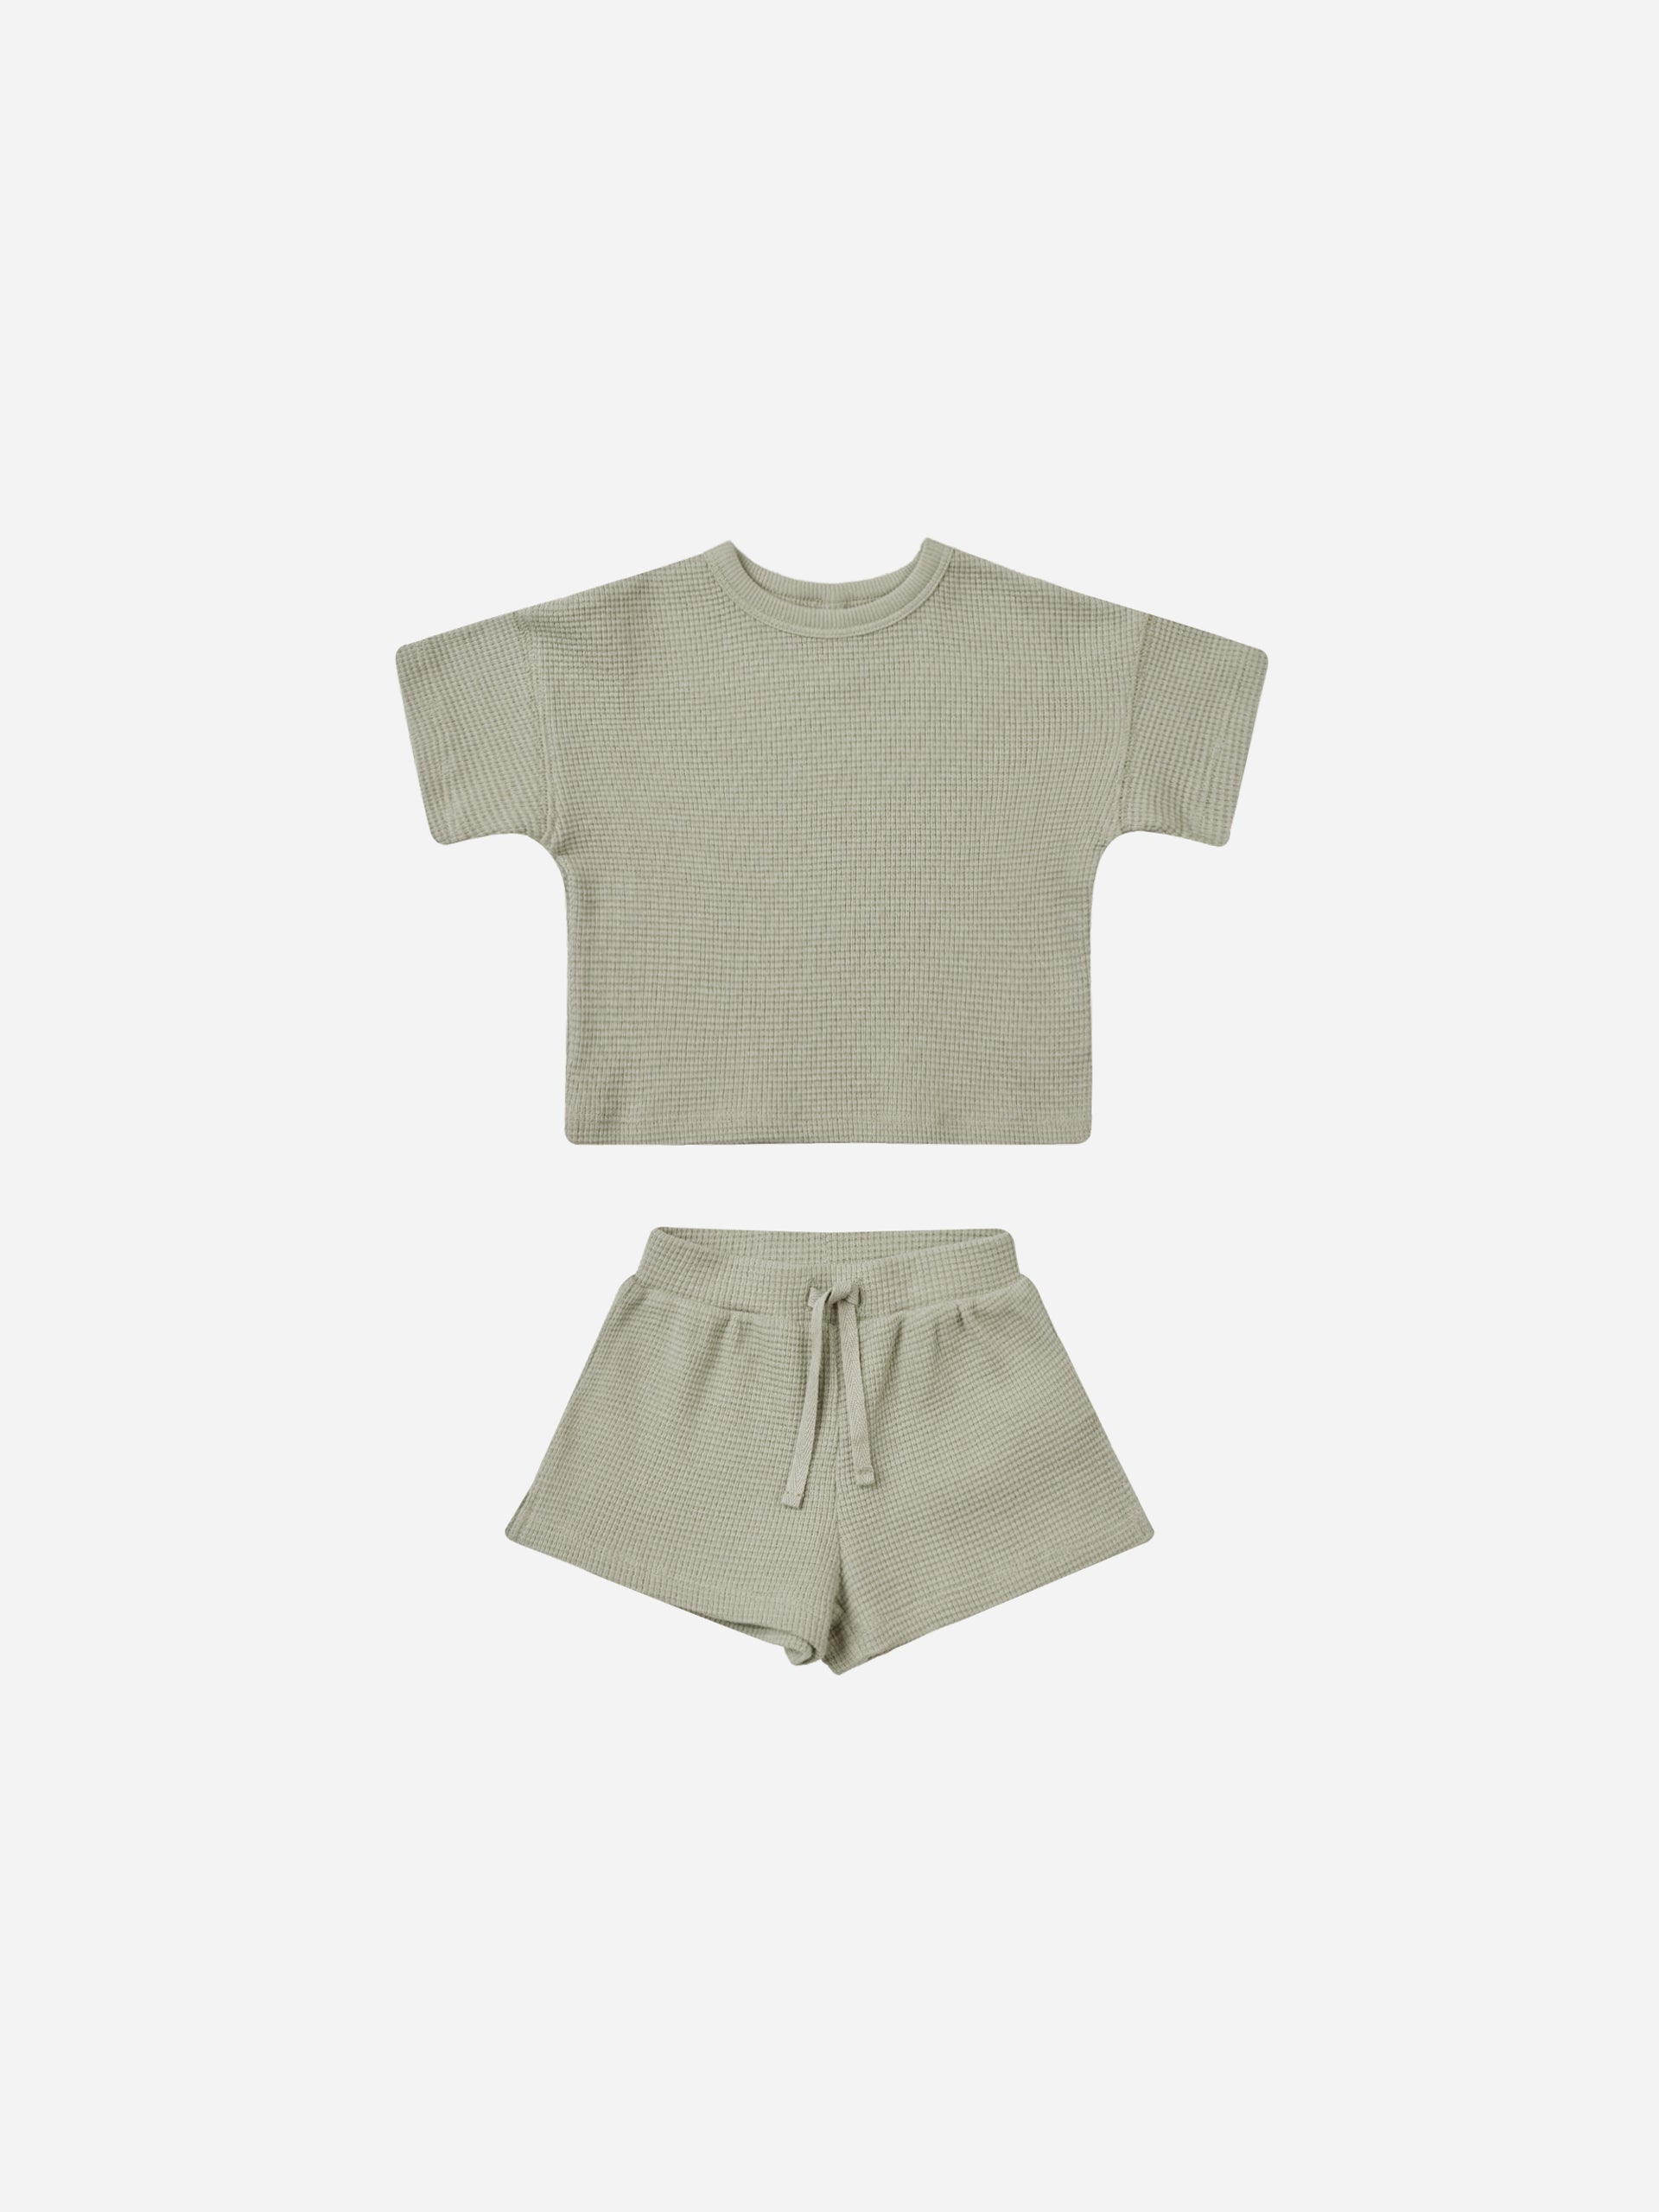 Waffle Tee + Short Set || Sage - Rylee + Cru | Kids Clothes | Trendy Baby Clothes | Modern Infant Outfits |